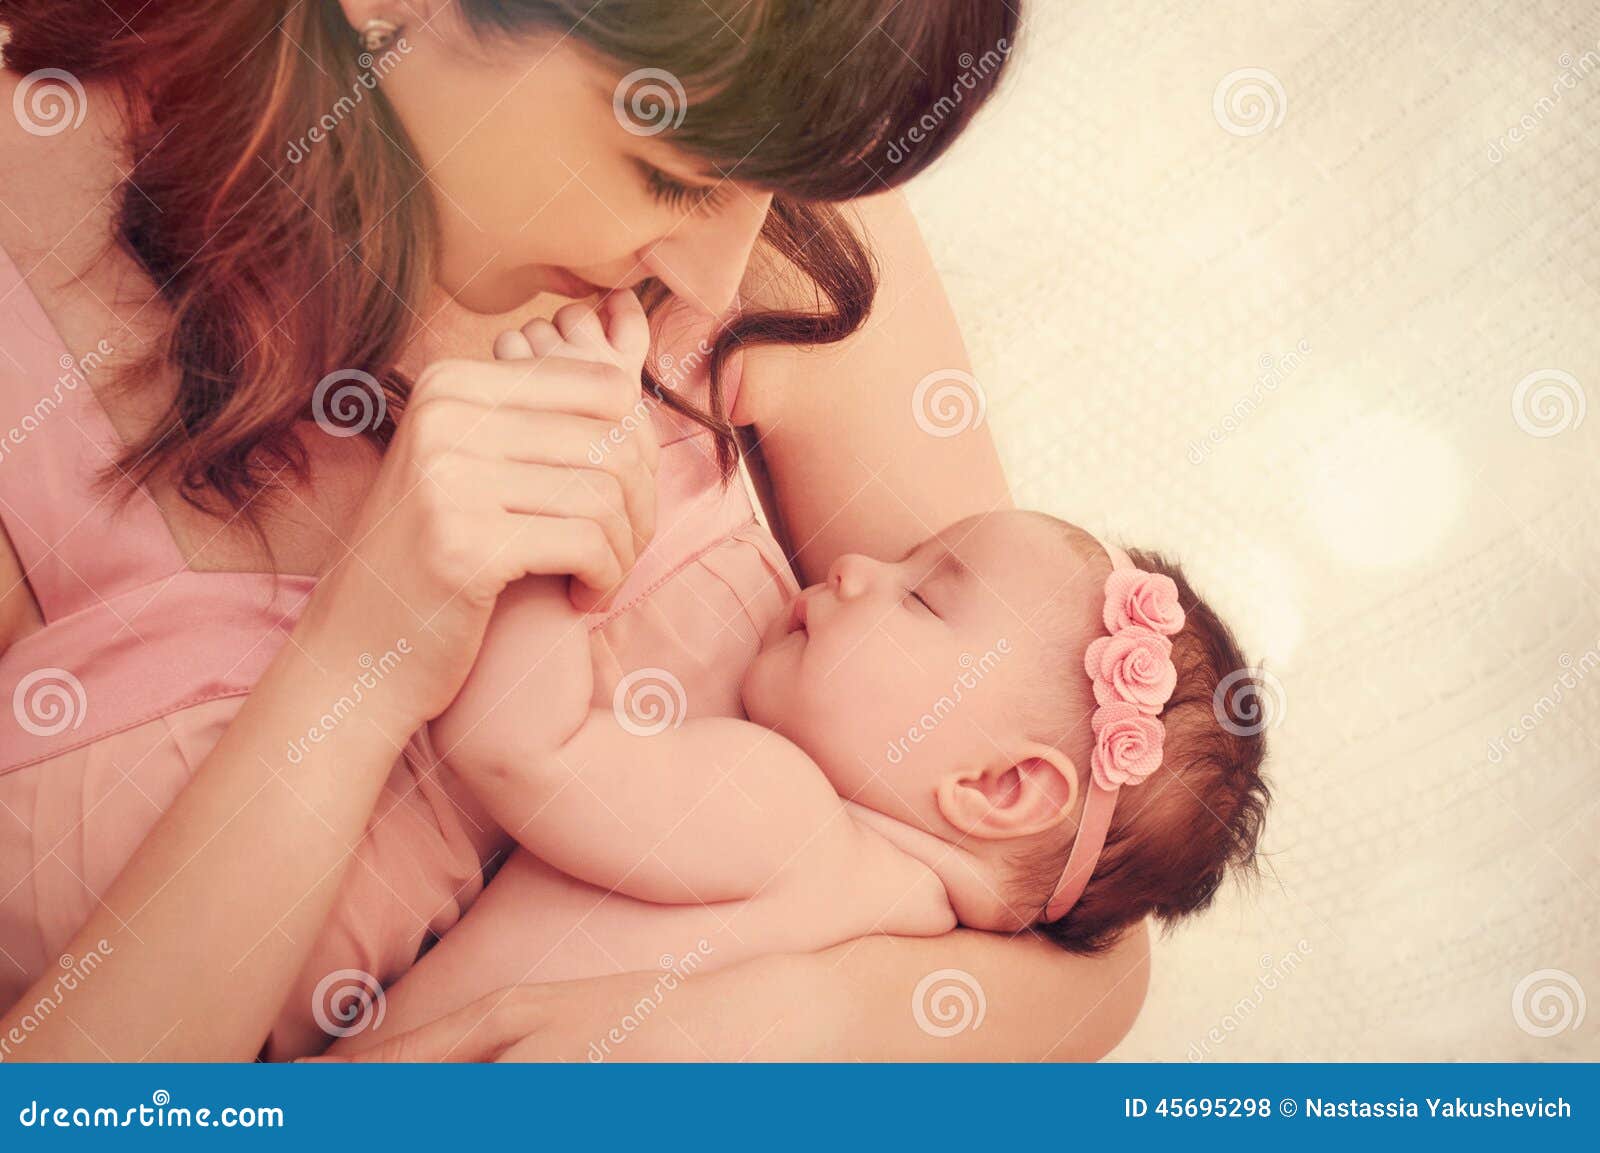 caring mother kissing little fingers of her cute sleeping baby g